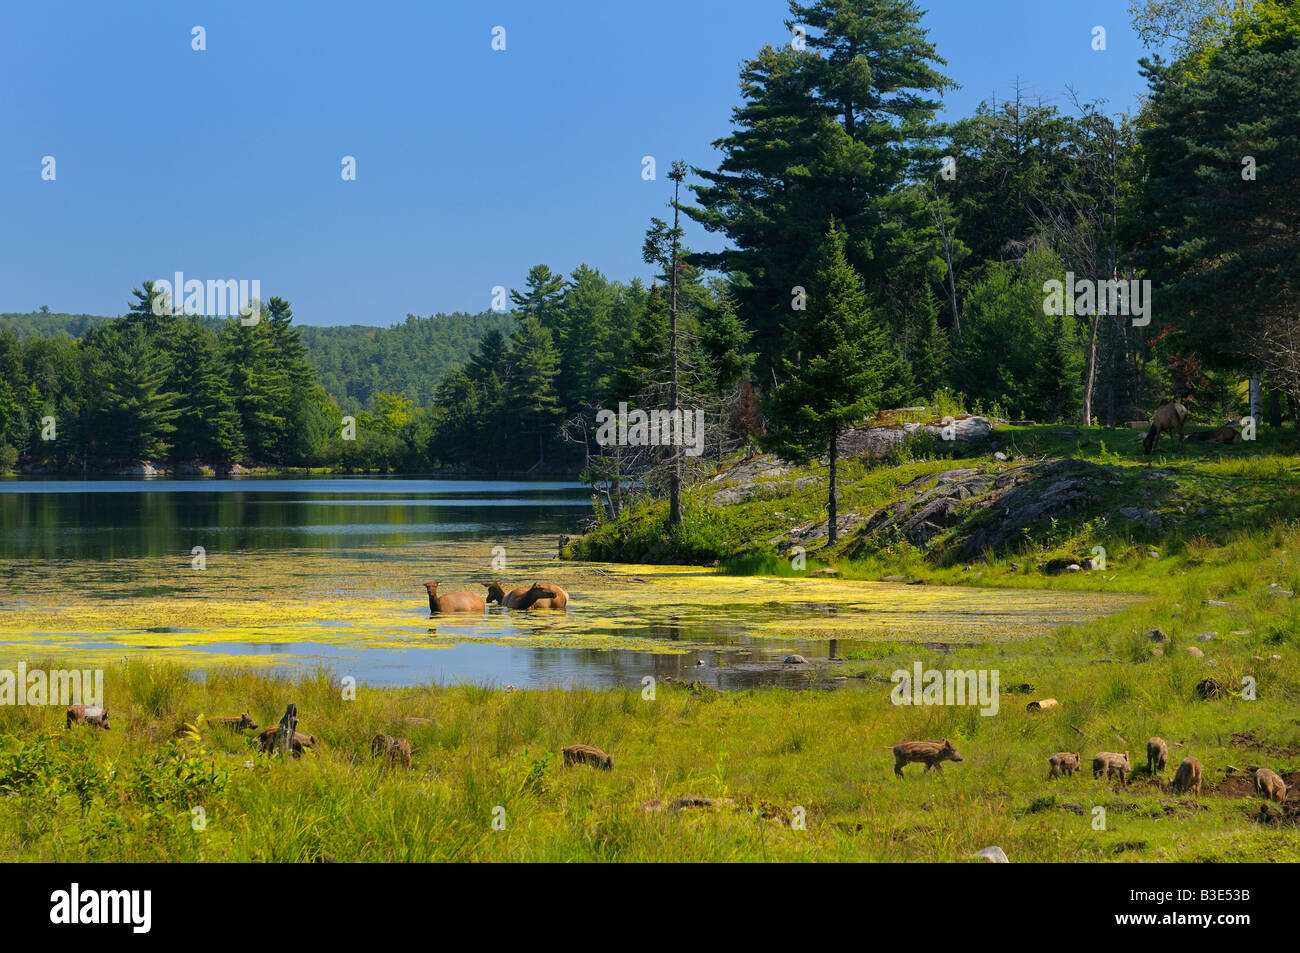 Wapiti Elk grazing and wading in a Lake with group of wild boar piglets in foreground at Park Omega nature preserve Quebec Stock Photo